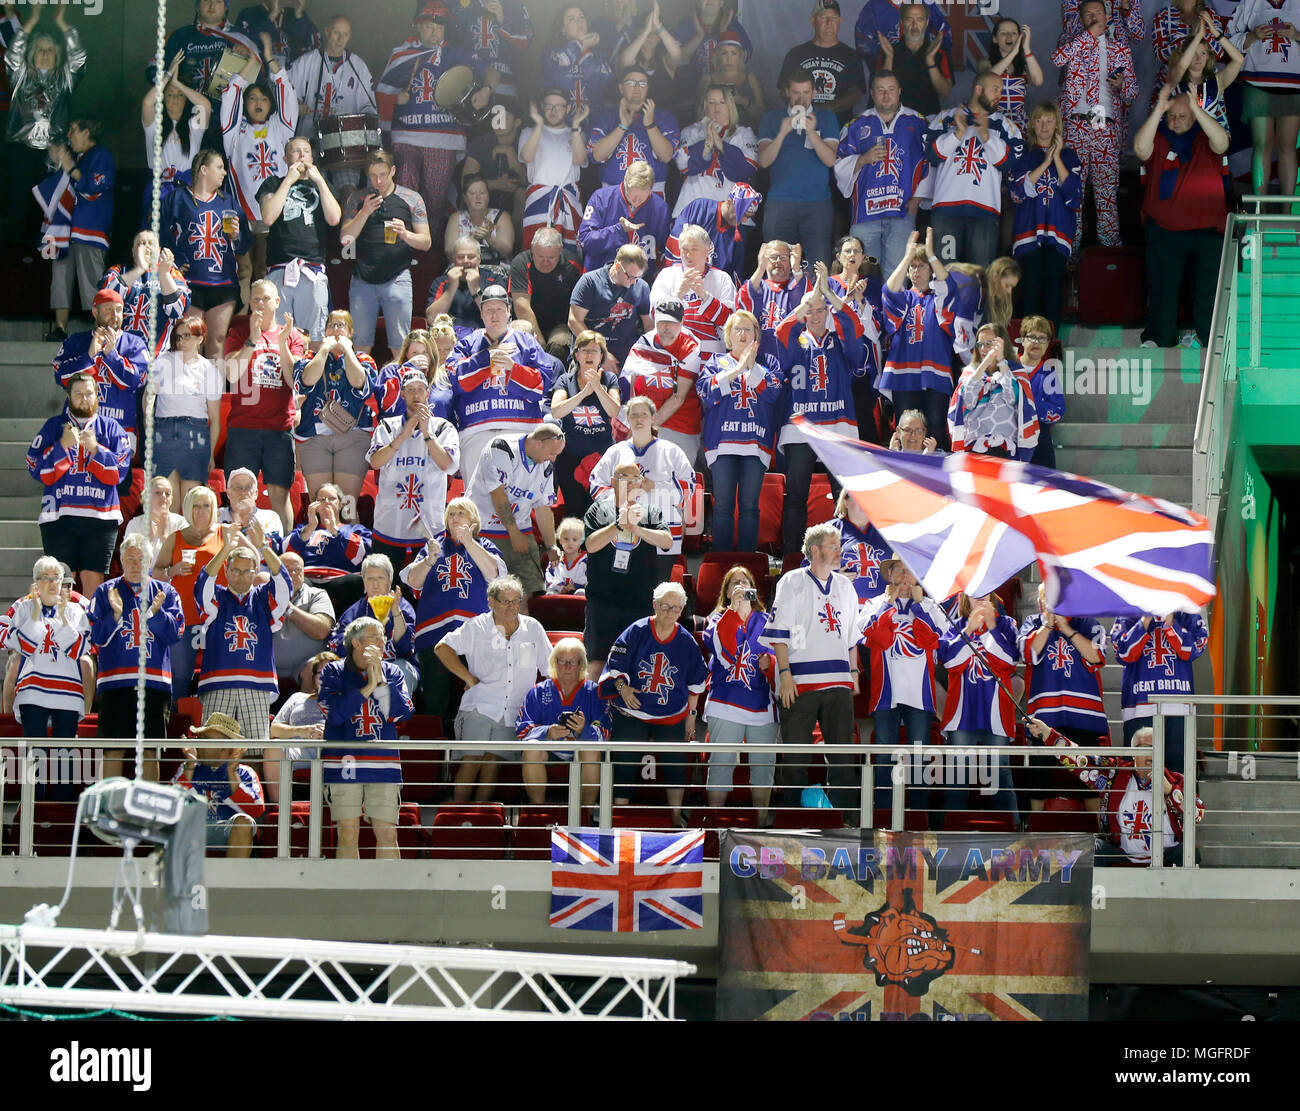 Budapest, Hungary. 28 April 2018. The British supporters cheer for the team during the 2018 IIHF Ice Hockey World Championship Division I Group A match between Hungary and Great Britain at Laszlo Papp Budapest Sports Arena on April 28, 2018 in Budapest, Hungary. Credit: Laszlo Szirtesi/Alamy Live News Stock Photo